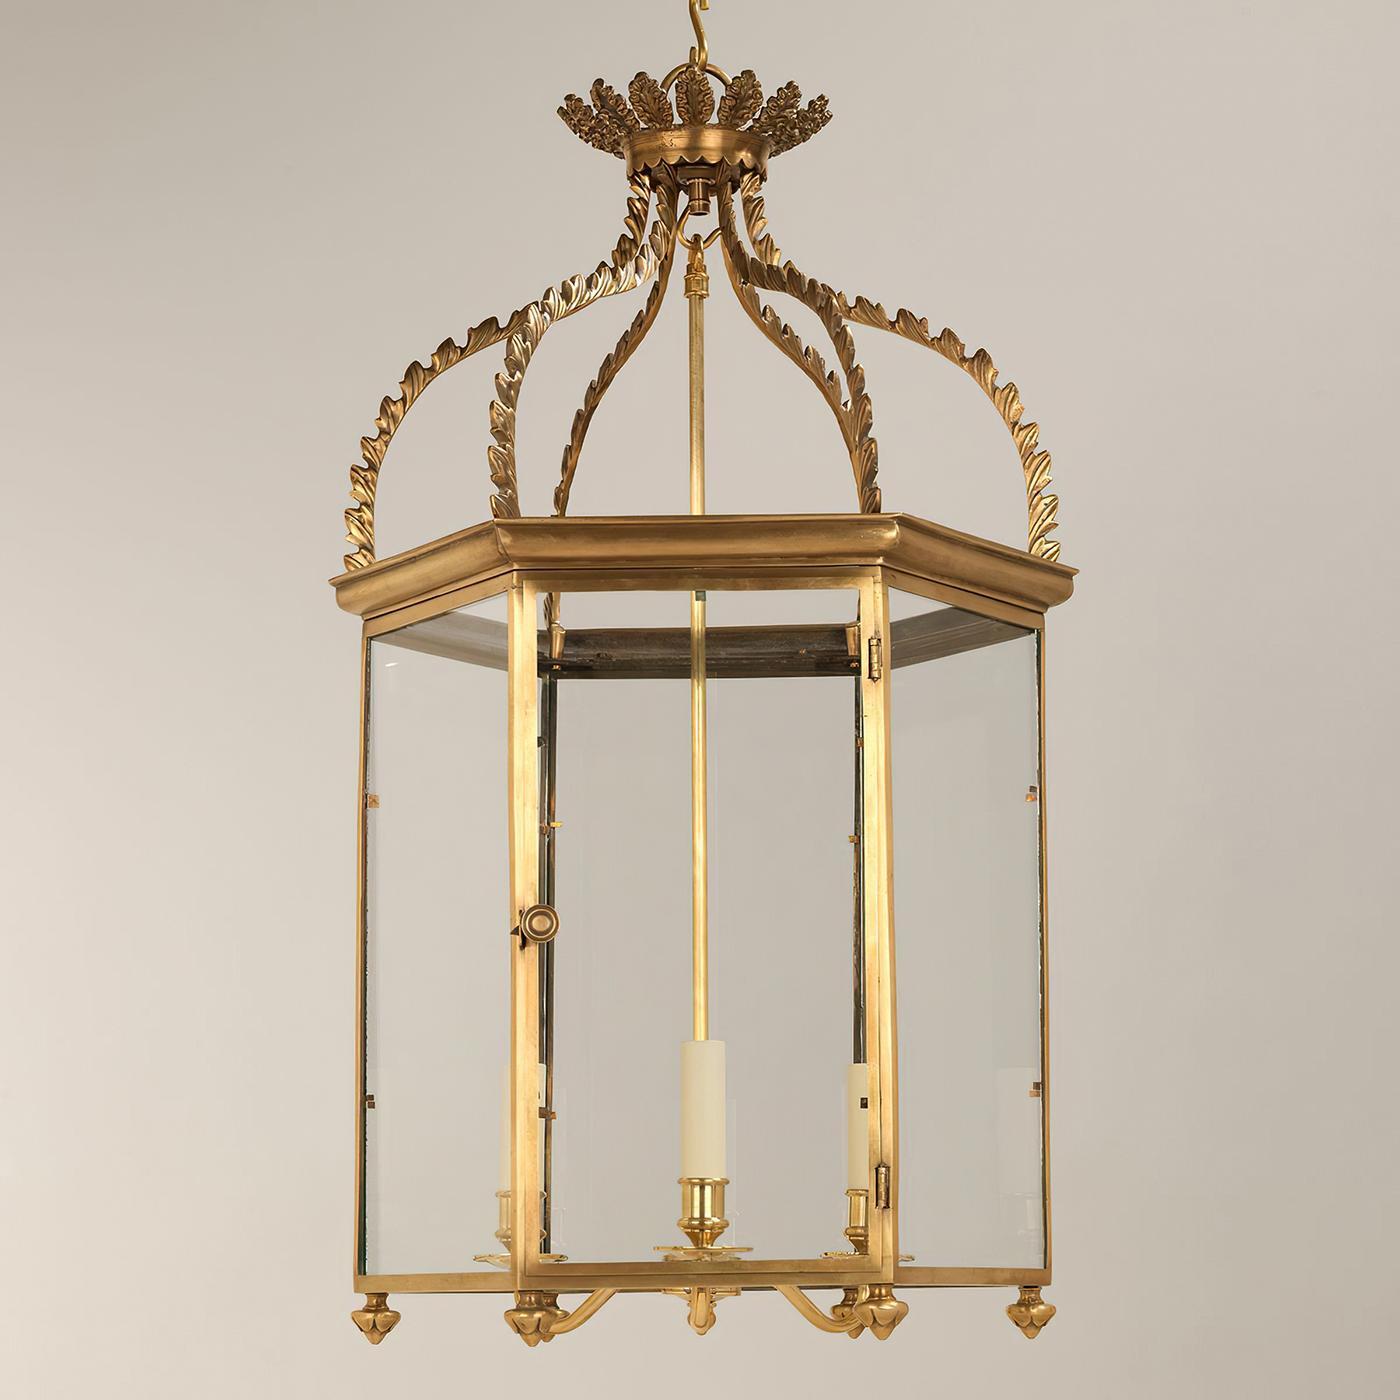 Regency hall lantern. This classic lantern is based on a 19th-century six-sided original. Superbly cast, it demonstrates a range of techniques, from the finely crafted frame to the ornately decorative upper section, finished with feathered detailing